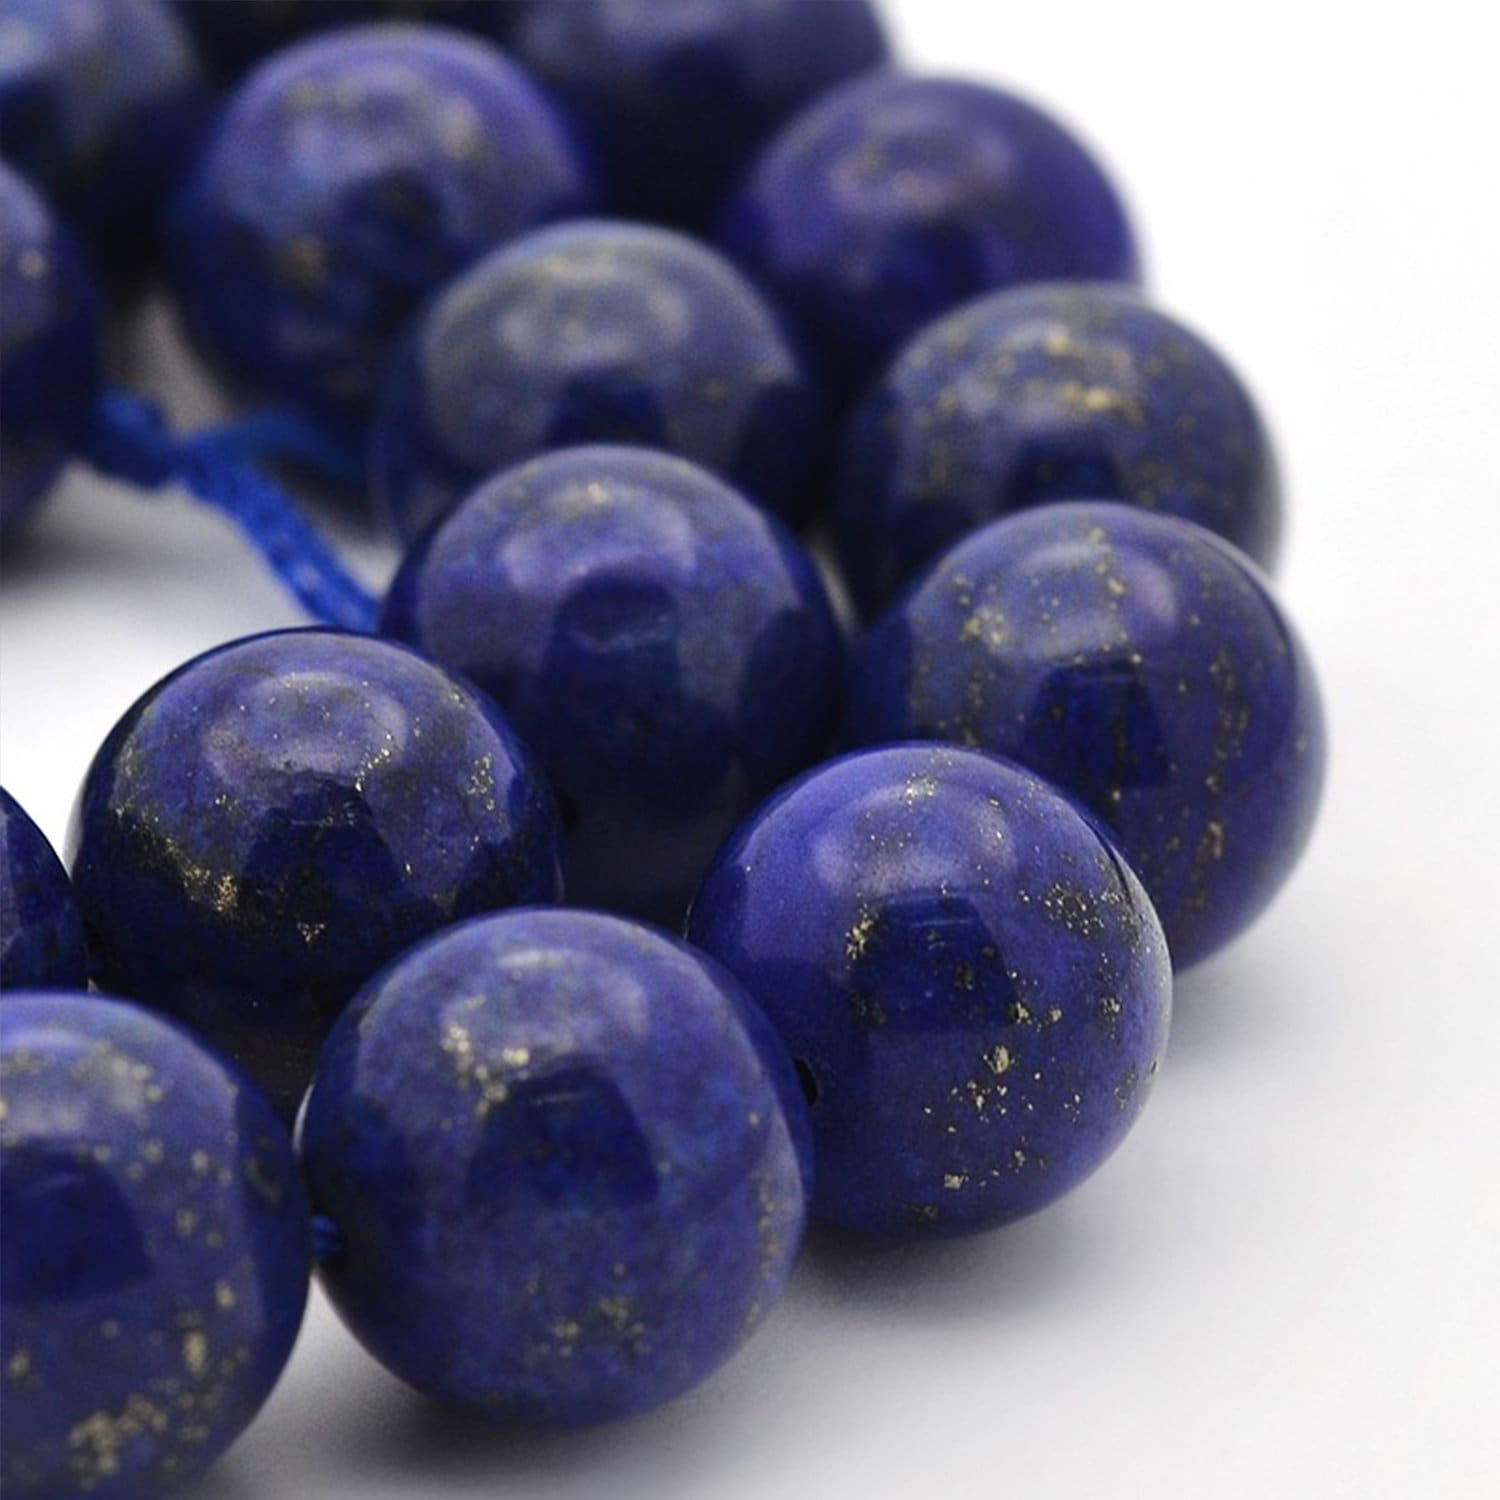 8MM Natural A Lapis Lazuli beads,15 inches per strand,Lapis Lazuli Smooth Round Loose beads wholesale supply,Diy beads